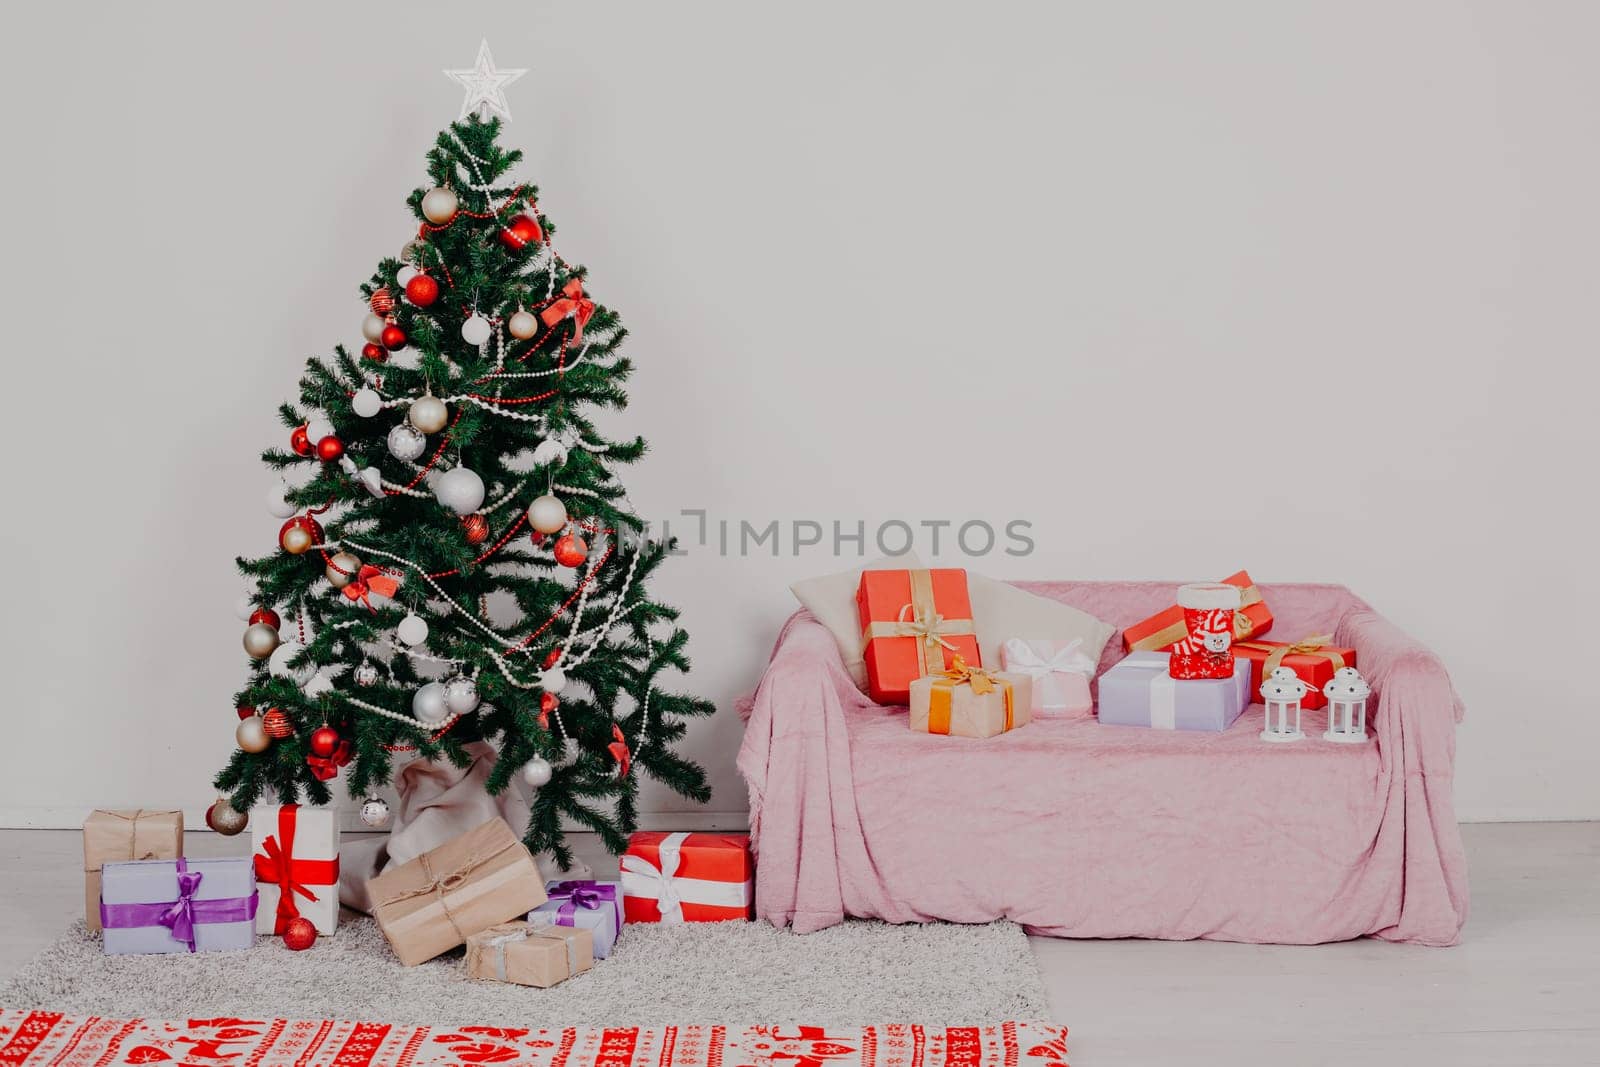 Christmas tree in a white room with Christmas decorations and gifts toys by Simakov